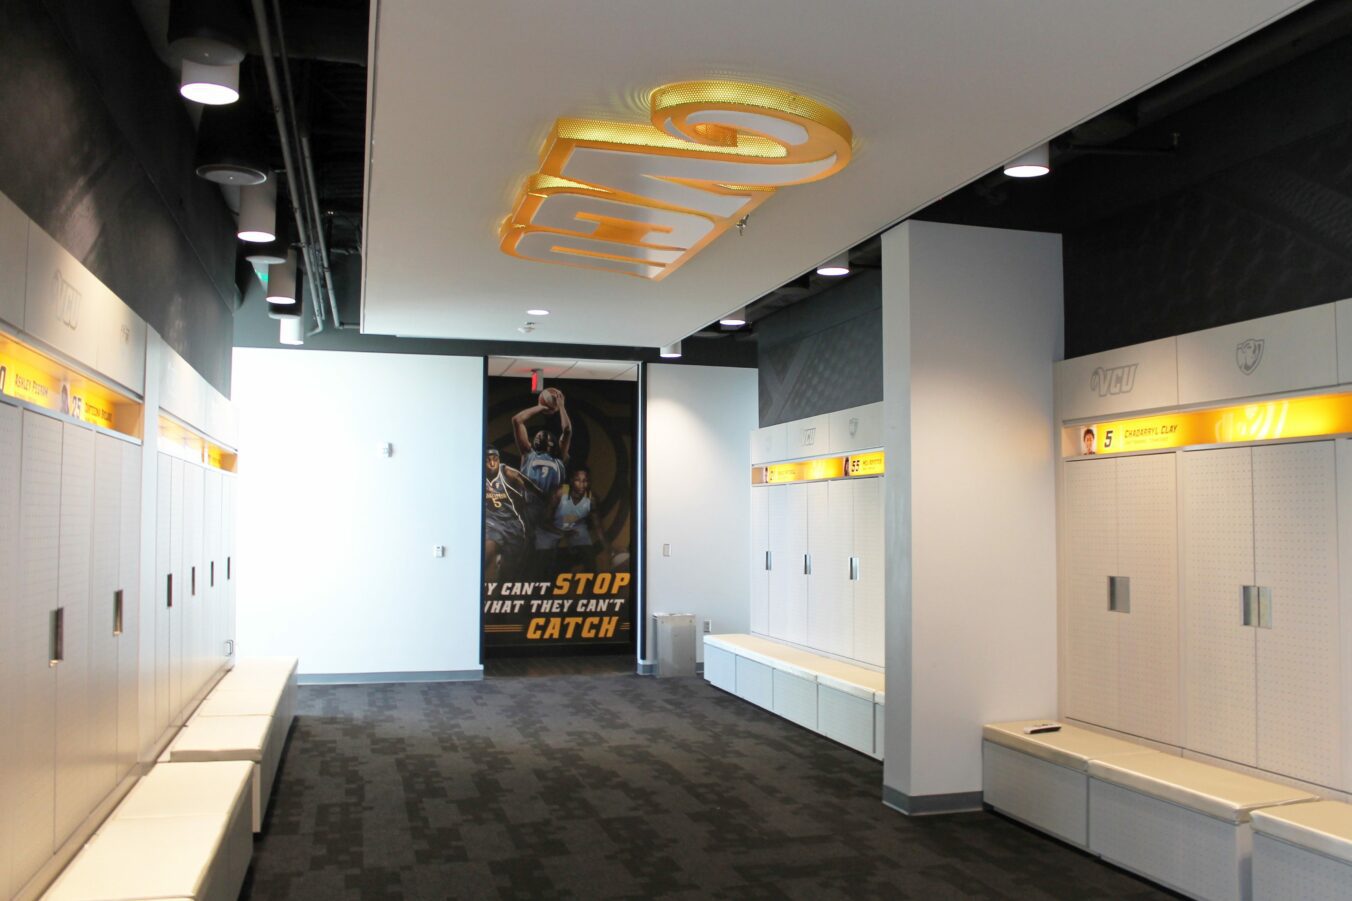 Locker room with player's names above white lockers